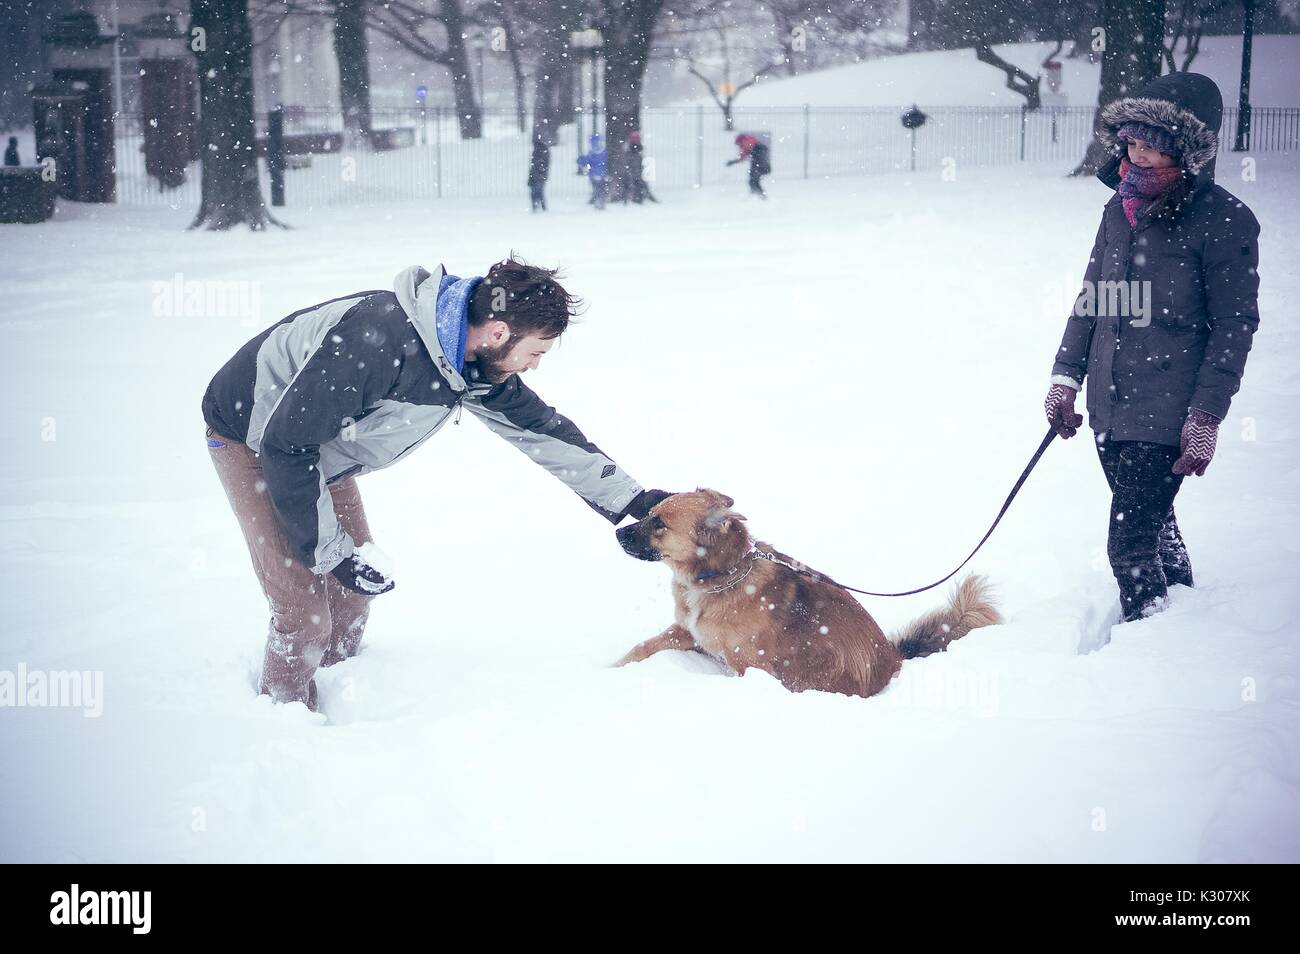 A man dressed in snow gear bends down to pet his dog in the snow, while his owner holds him by leash, during a snow day at Johns Hopkins University, Baltimore, Maryland, 2016. Stock Photo